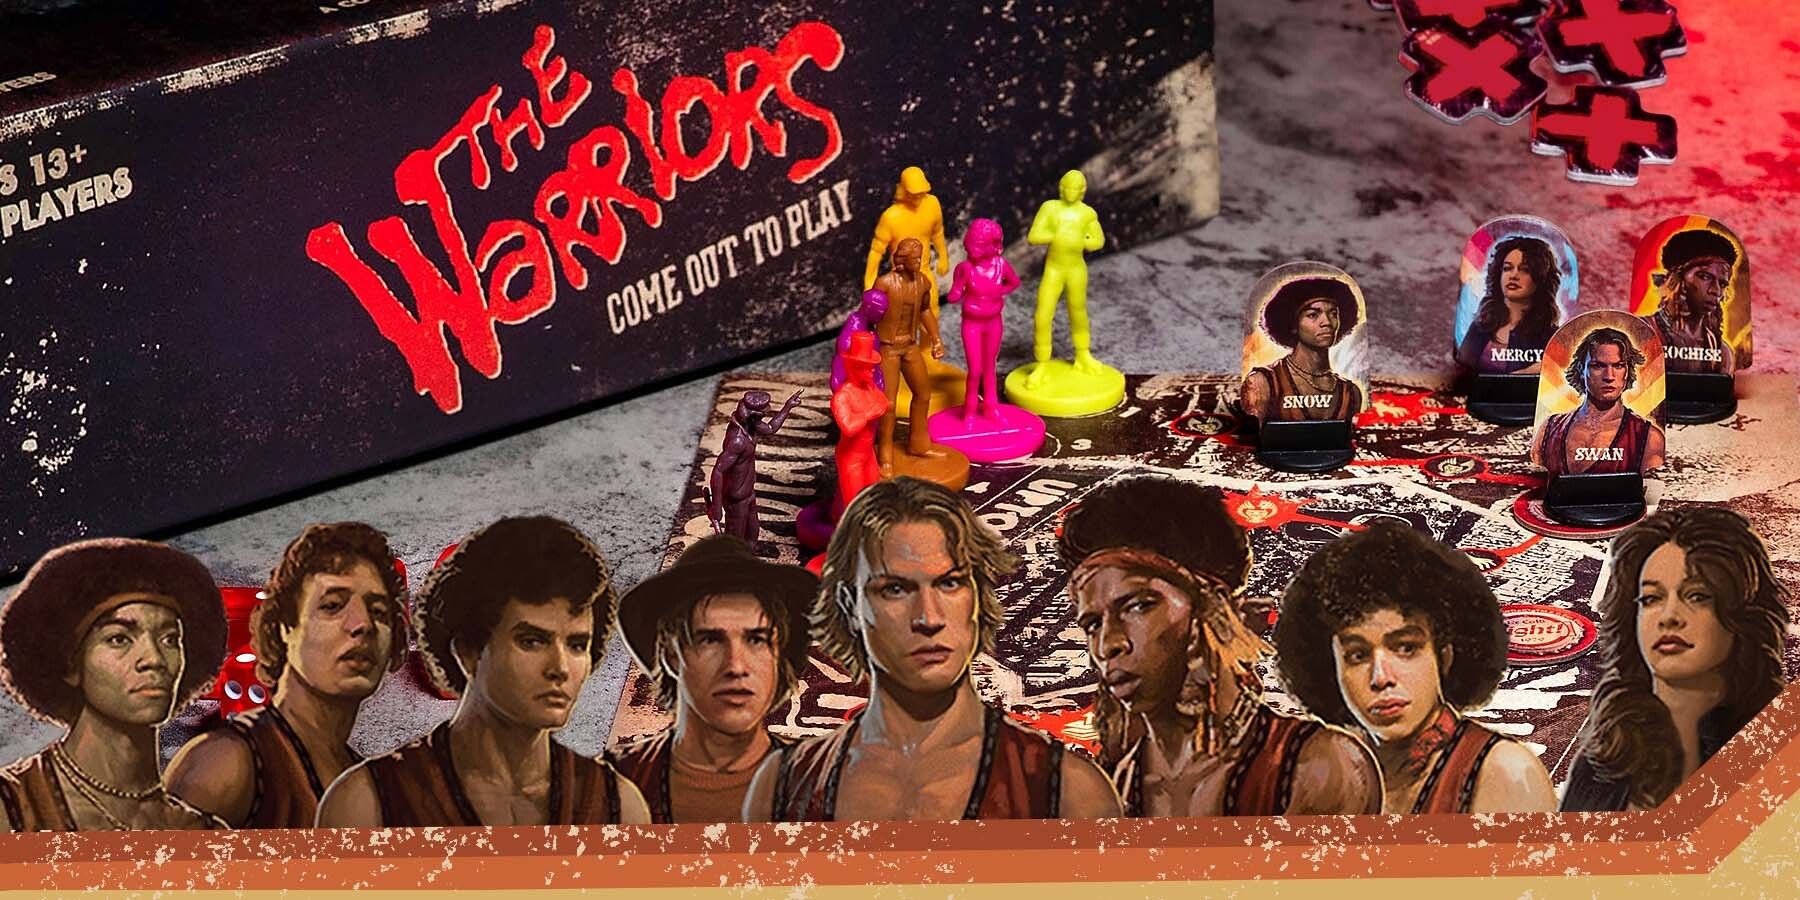 warriors come out to play board game